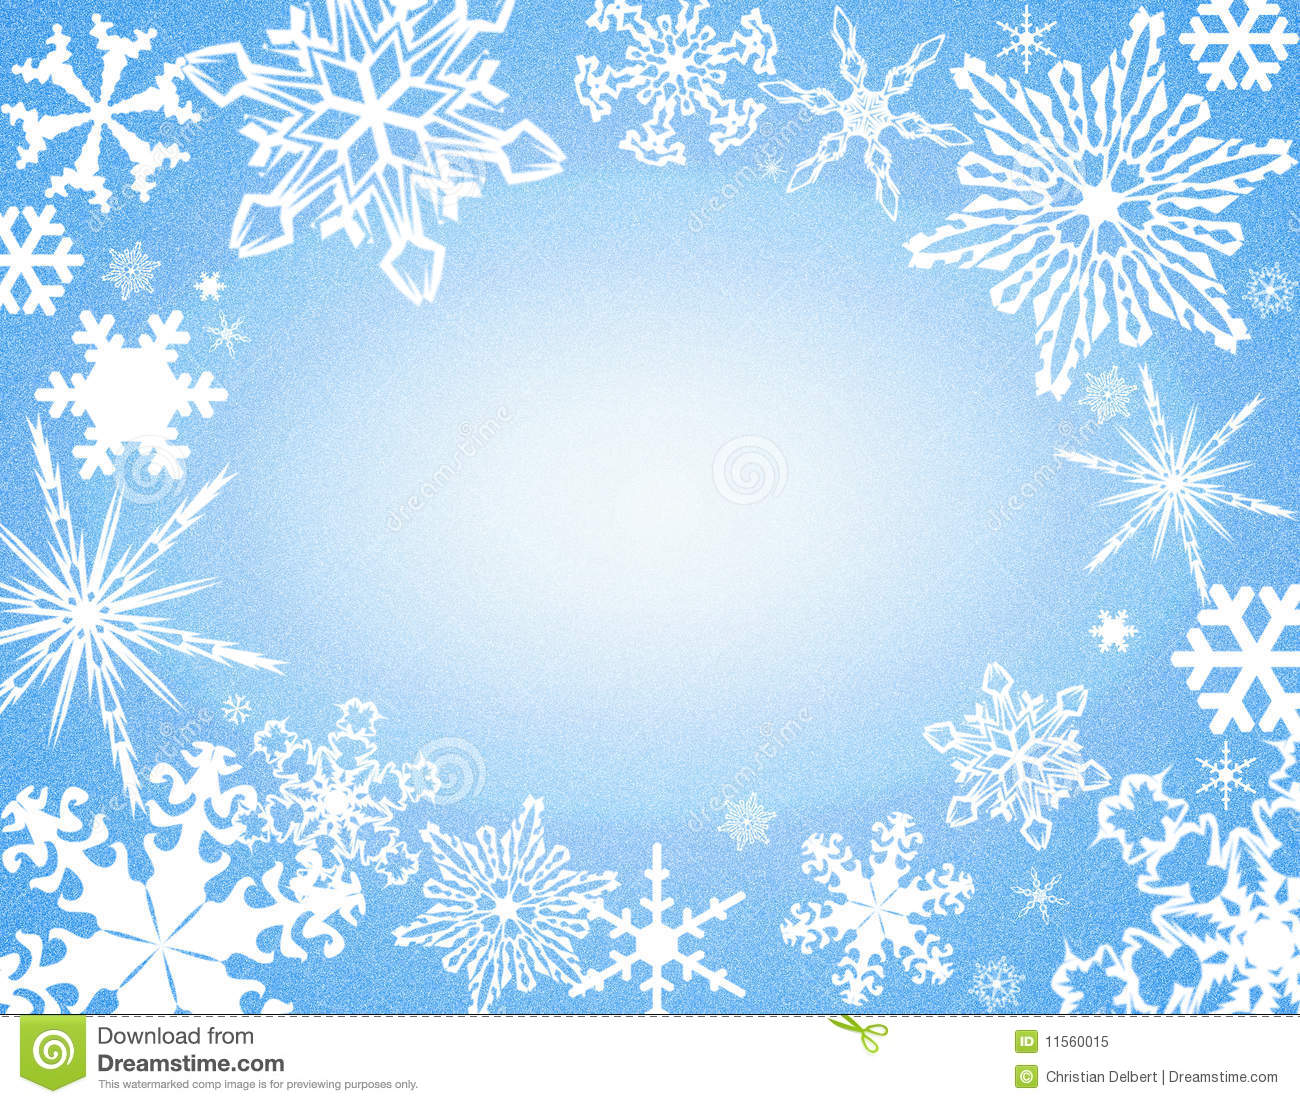 Snowflakes Bordering A White Oval In The Middle Of Blue Sky